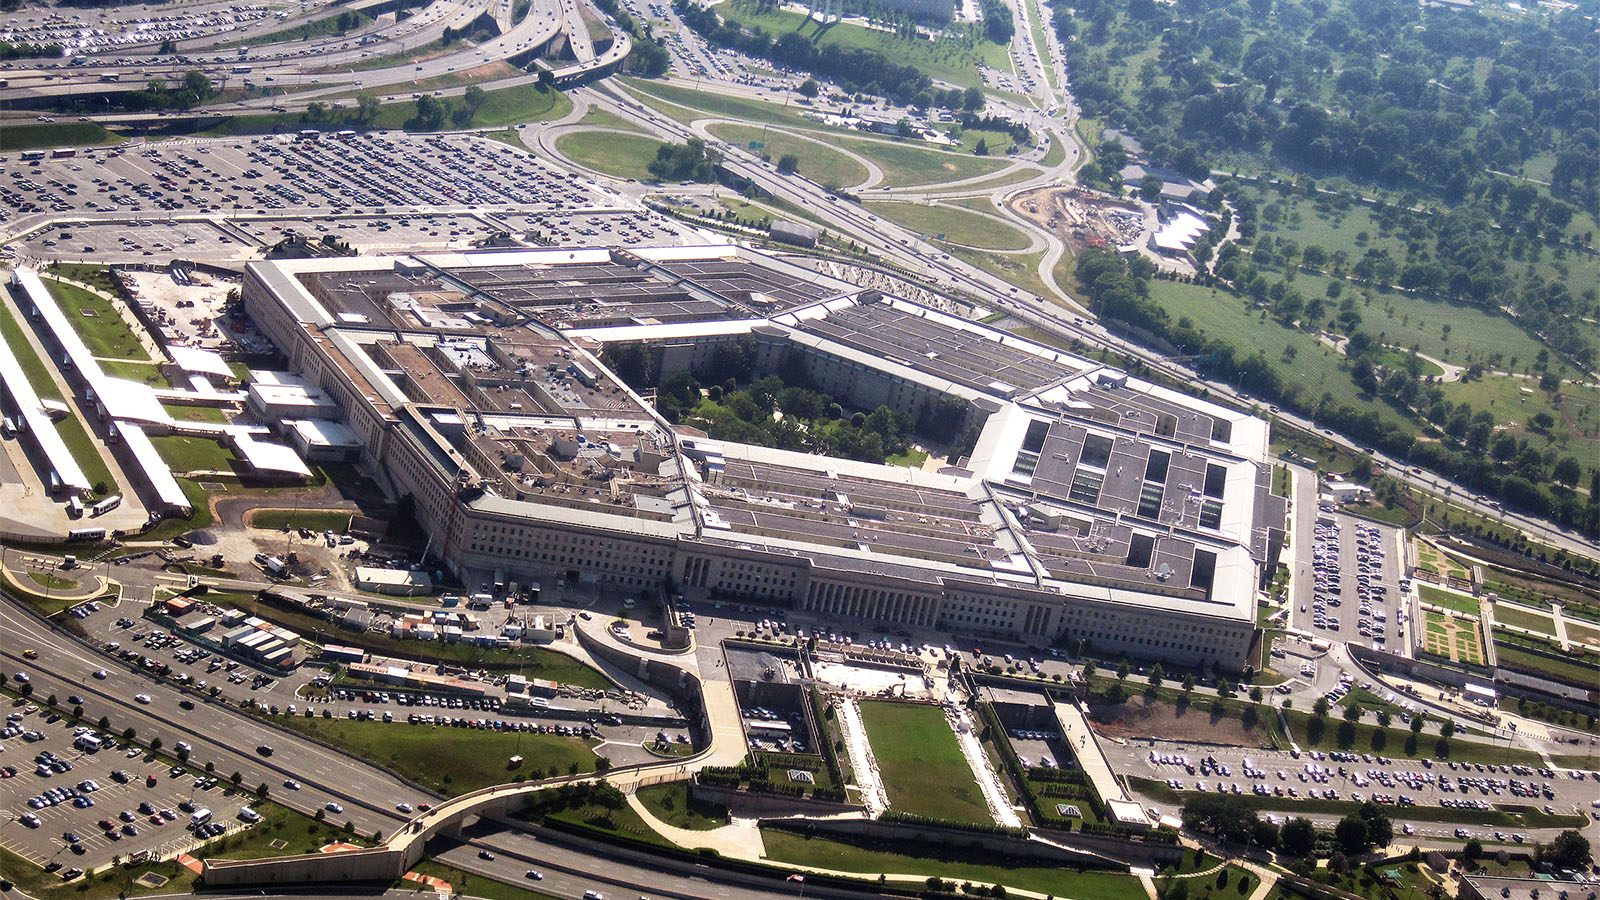 The Pentagon, the headquarters of the US Department of Defense, in Washington. Photo courtesy of Wikipedia/Creative Commons